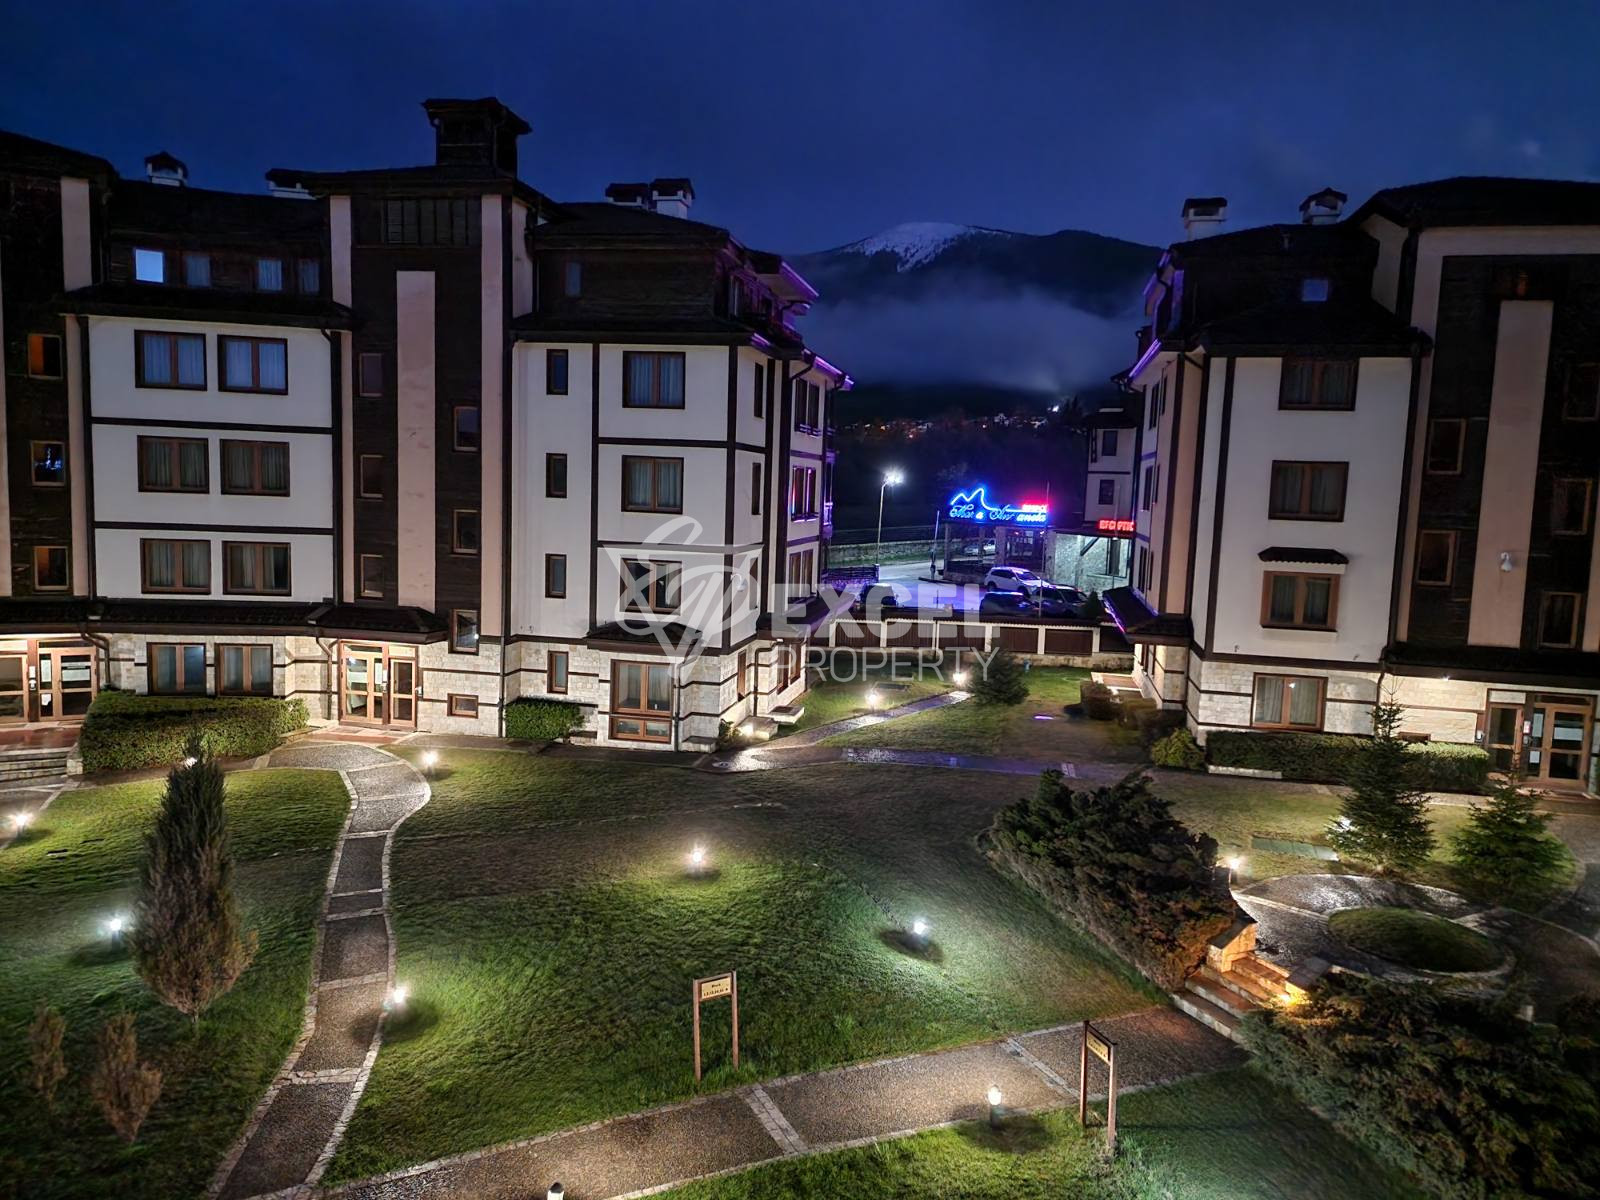 Spacious furnished one bedroom apartment 200 meters from the Gondola in Bansko